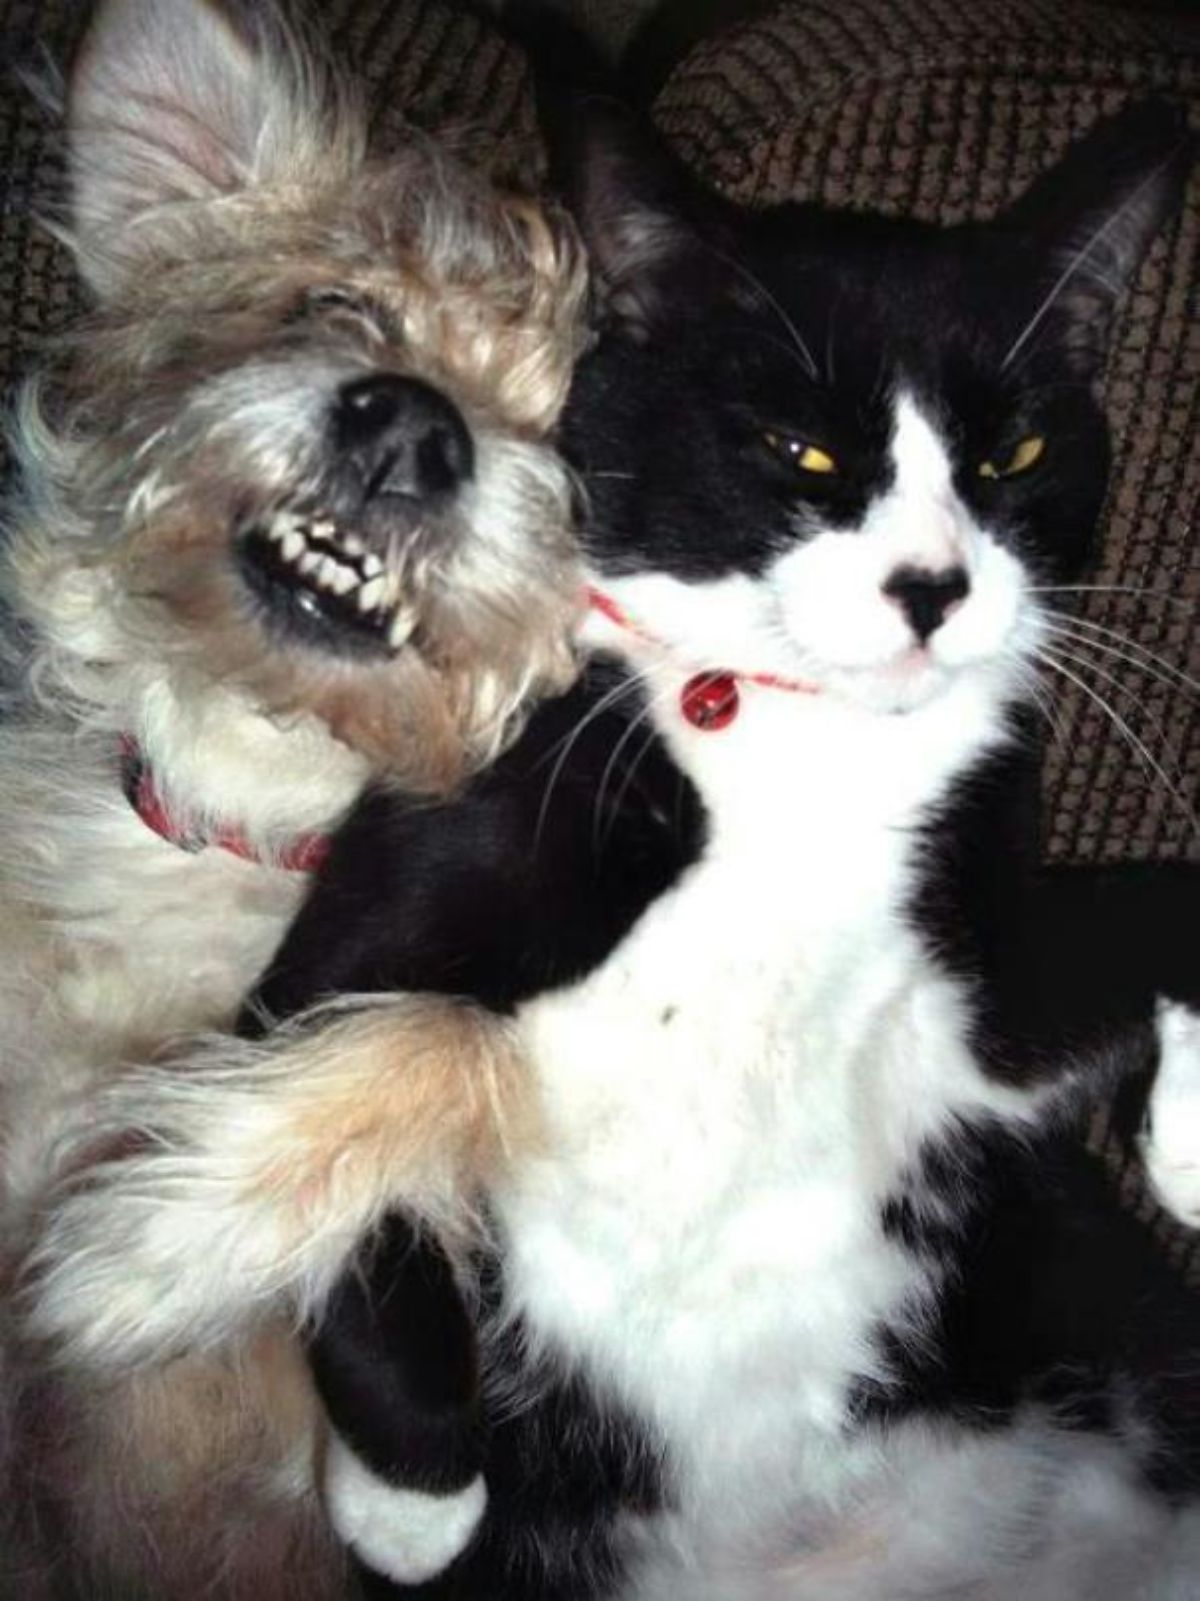 fluffy brown and white dog with teeth showing laying against an annoyed black and white cat